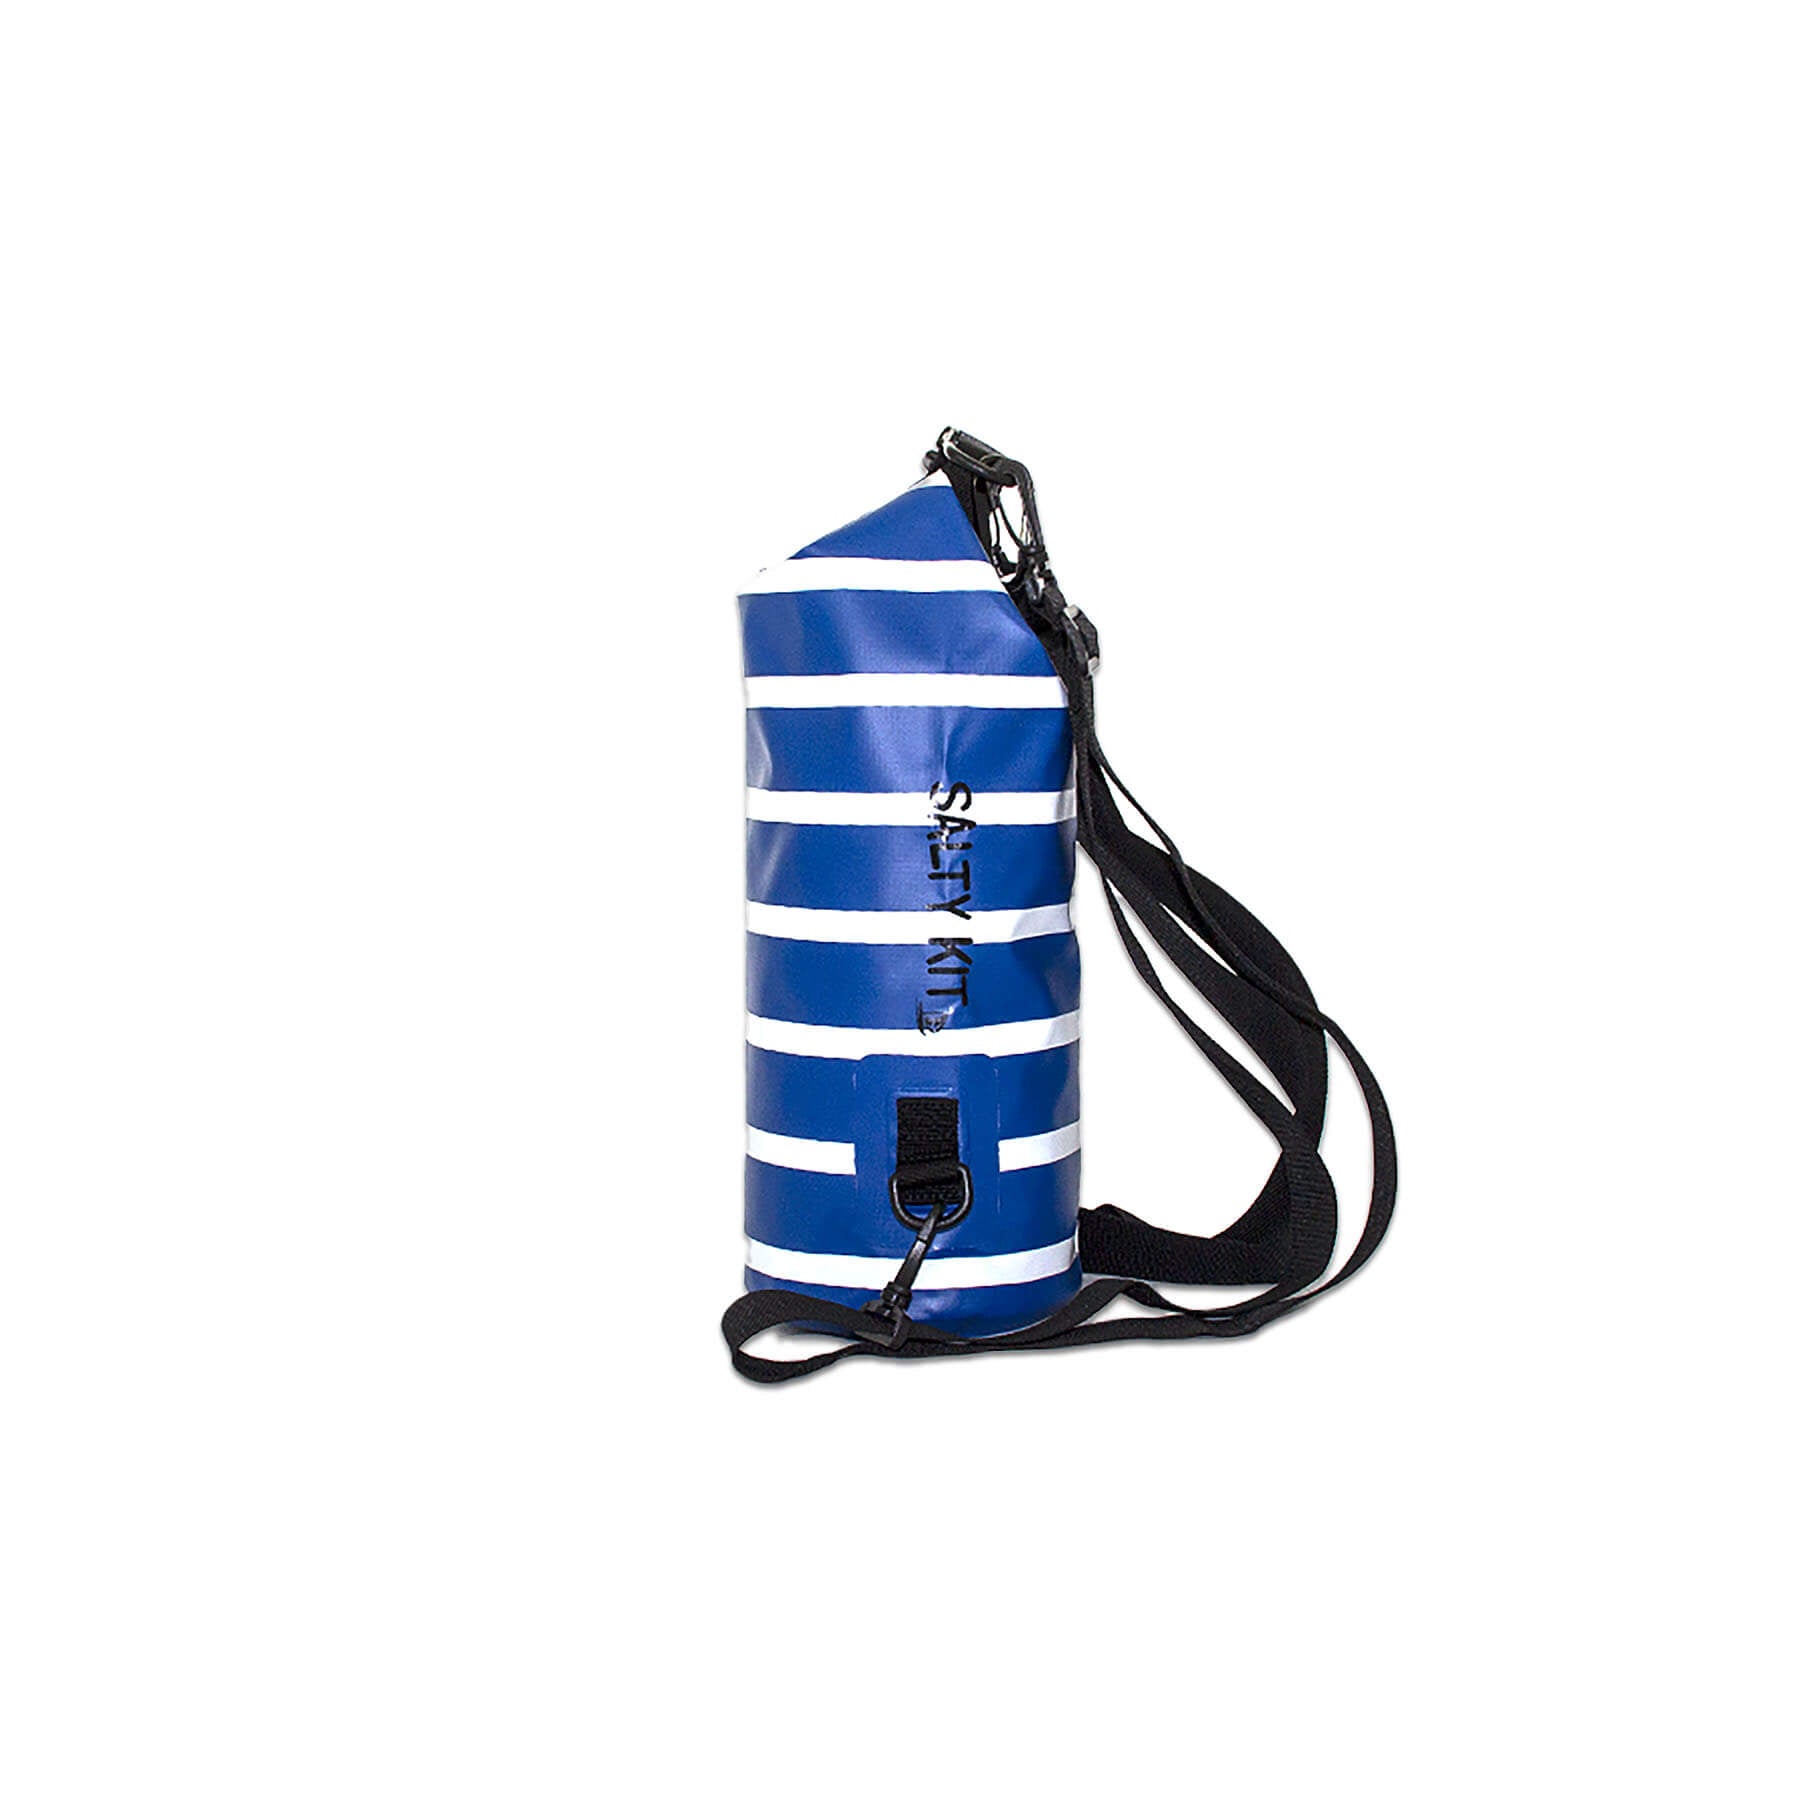 waterproof dry bag 5 litres a handy grab size with detachable straps and carabiner  nautical look side view